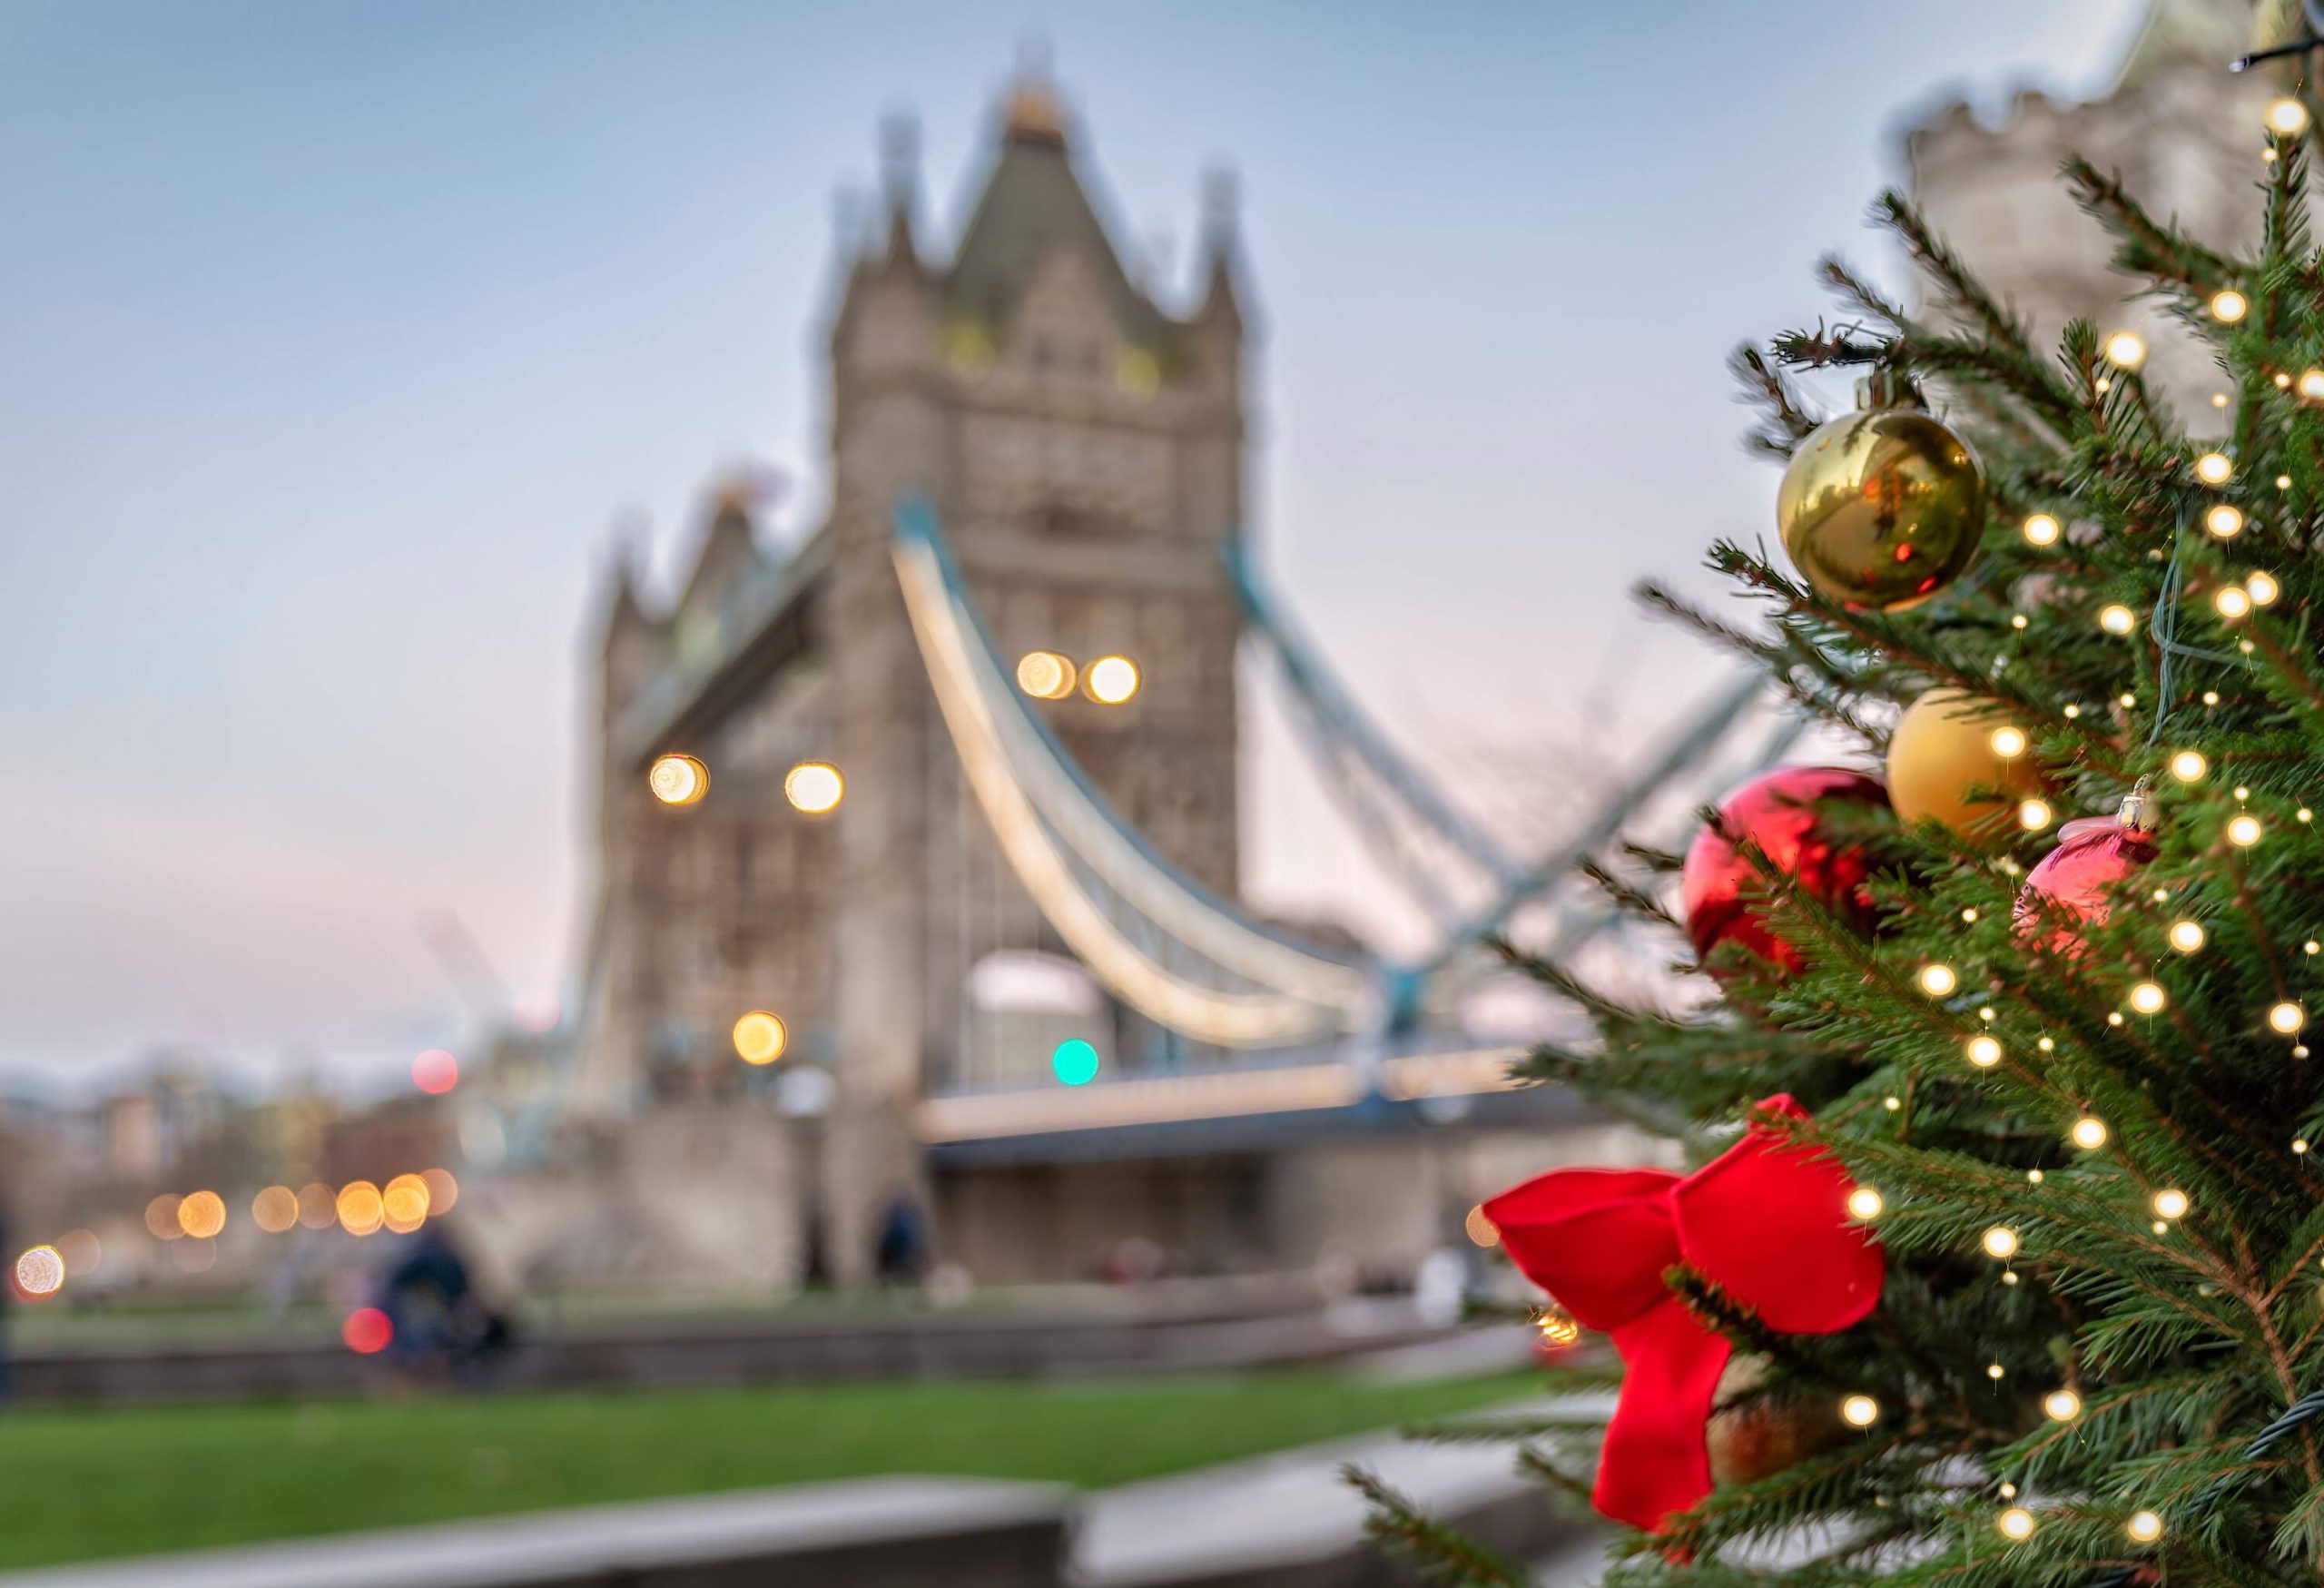 A Christmas tree decorated with colourful Christmas ornaments and a blurry image of London Bridge in the background.